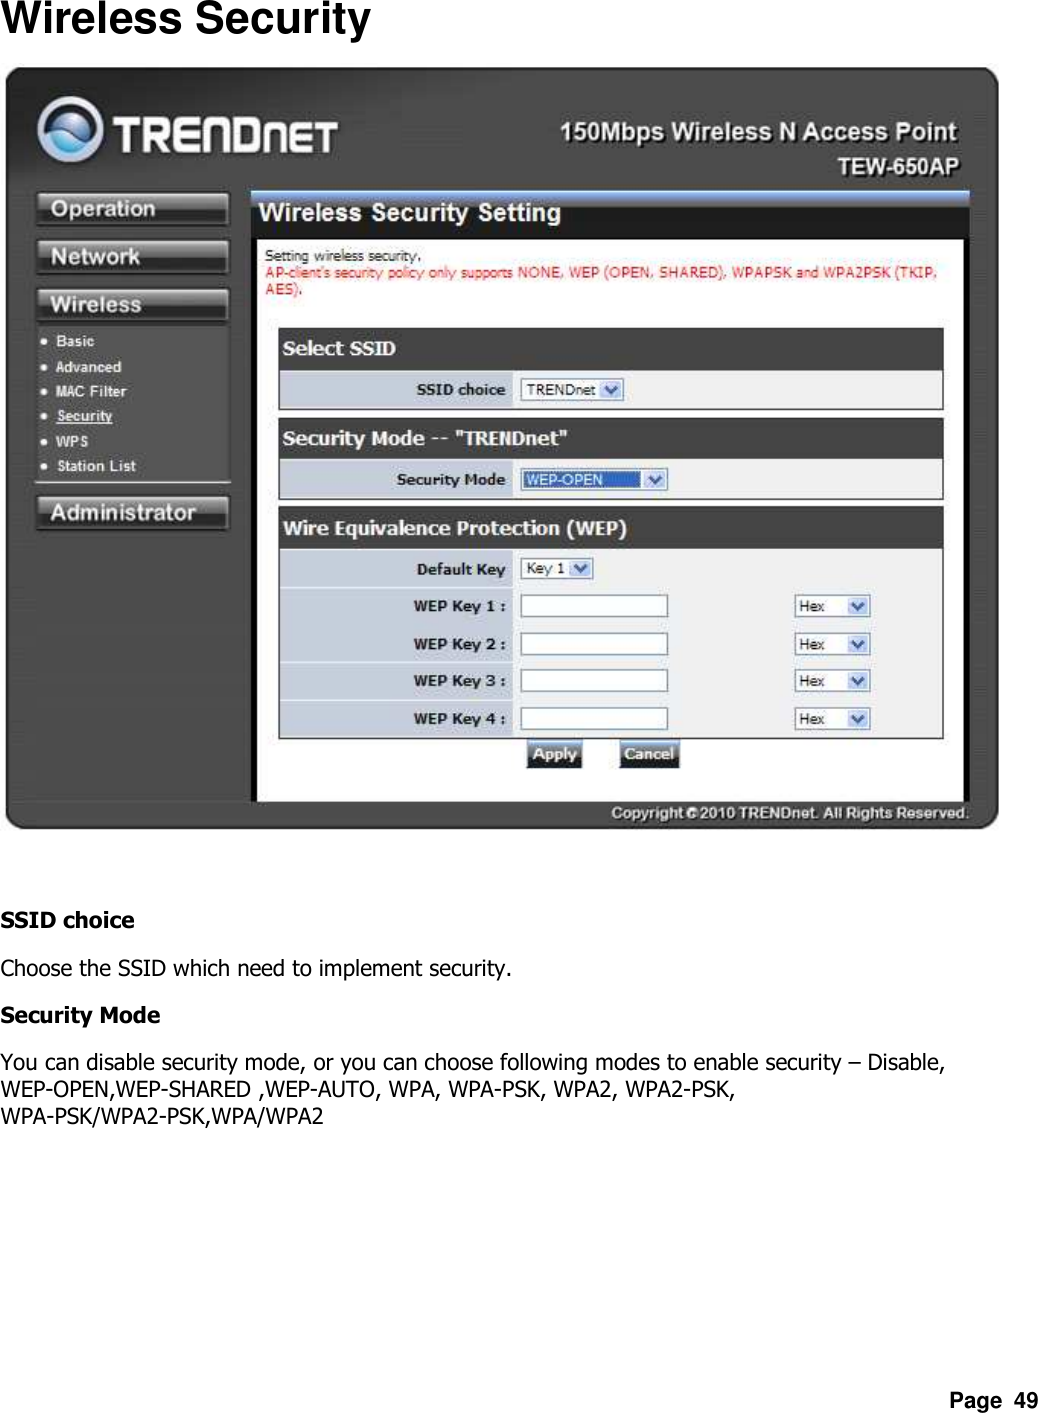 Page  49 Wireless Security   SSID choice Choose the SSID which need to implement security. Security Mode You can disable security mode, or you can choose following modes to enable security – Disable, WEP-OPEN,WEP-SHARED ,WEP-AUTO, WPA, WPA-PSK, WPA2, WPA2-PSK, WPA-PSK/WPA2-PSK,WPA/WPA2  